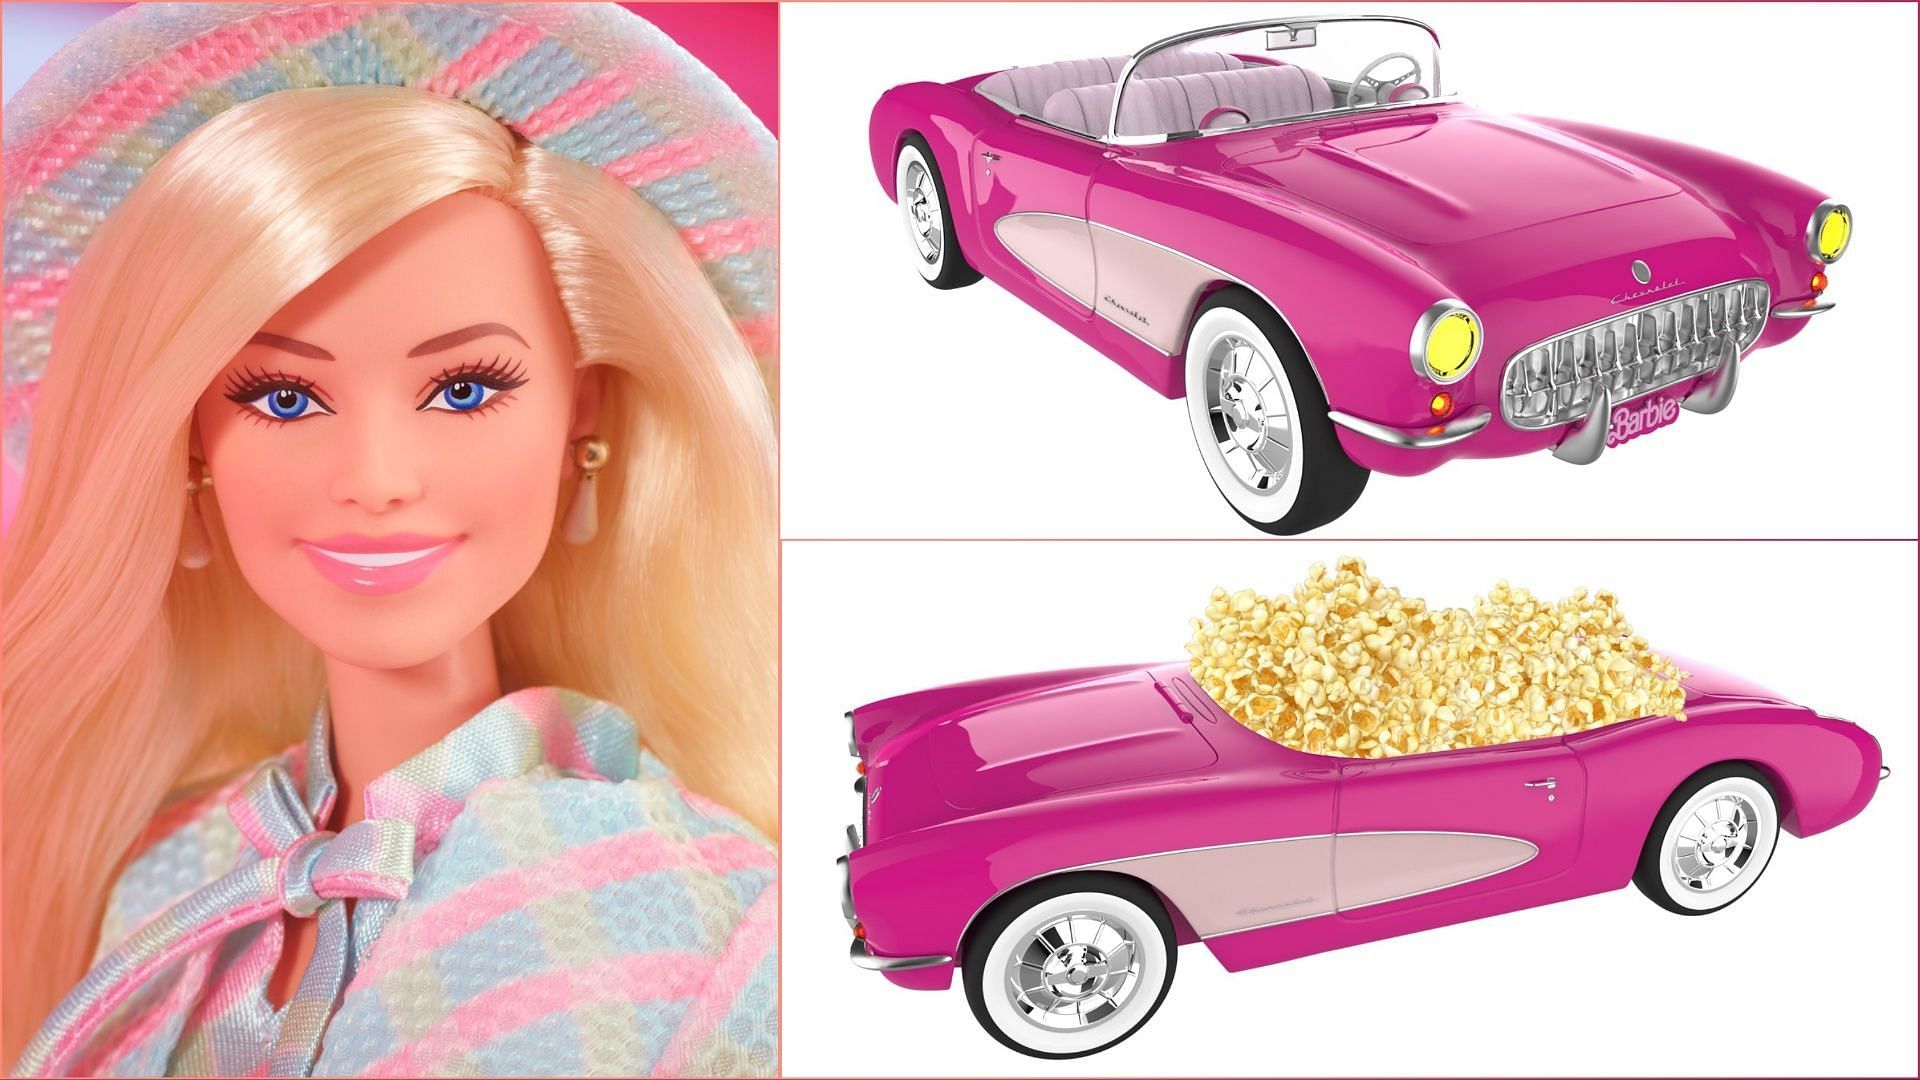 The Pink Corvette Popcorn Bucket holds 85-oz popcorn and is priced at over $34.99 (Image via AMC Theatres)